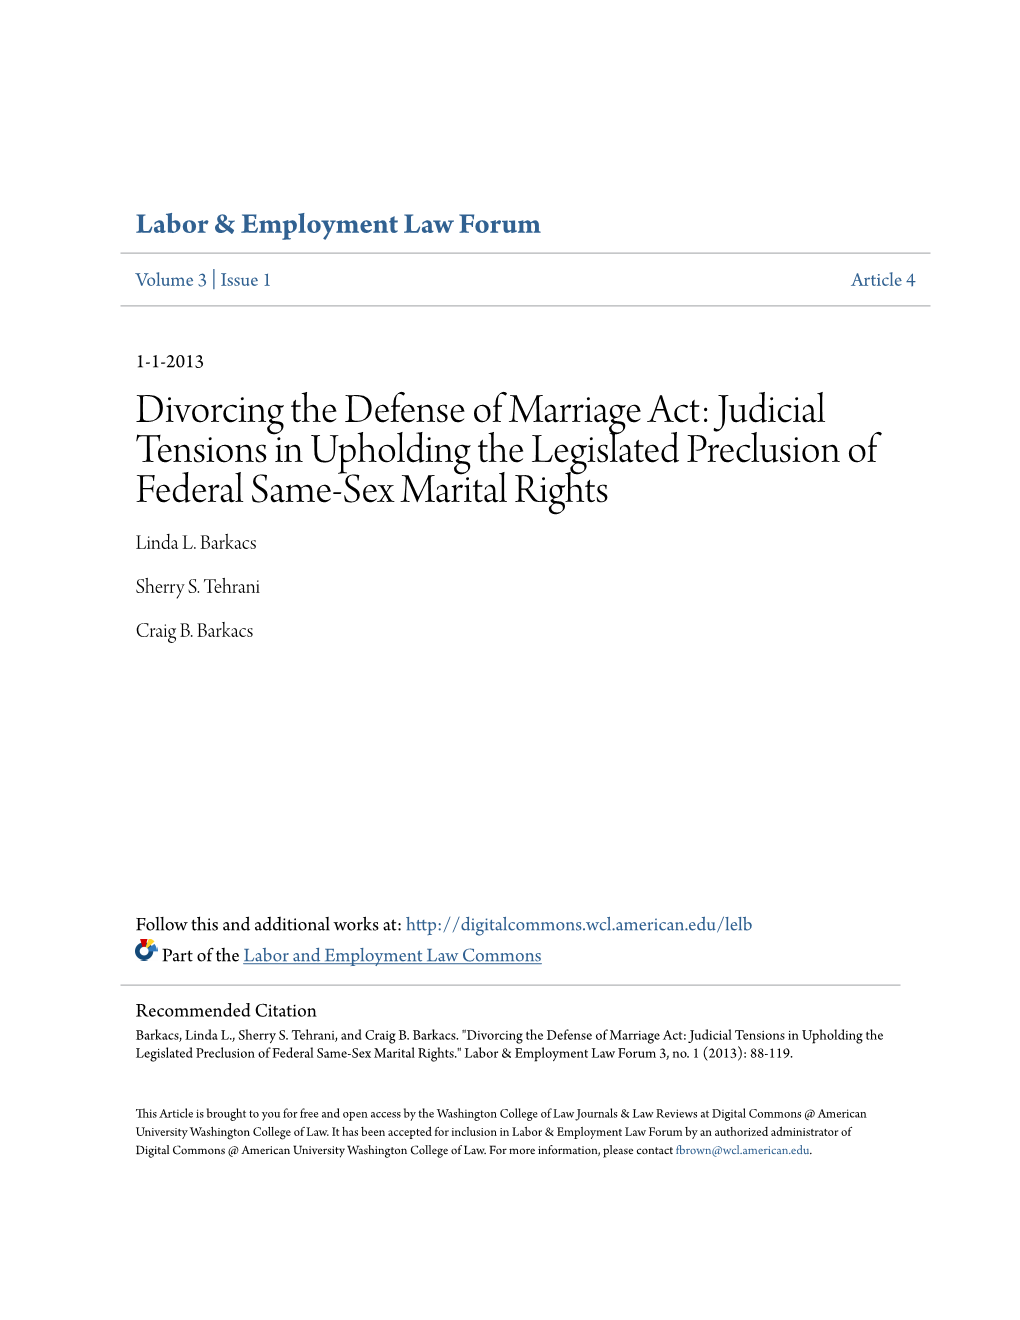 Divorcing the Defense of Marriage Act: Judicial Tensions in Upholding the Legislated Preclusion of Federal Same-Sex Marital Rights Linda L